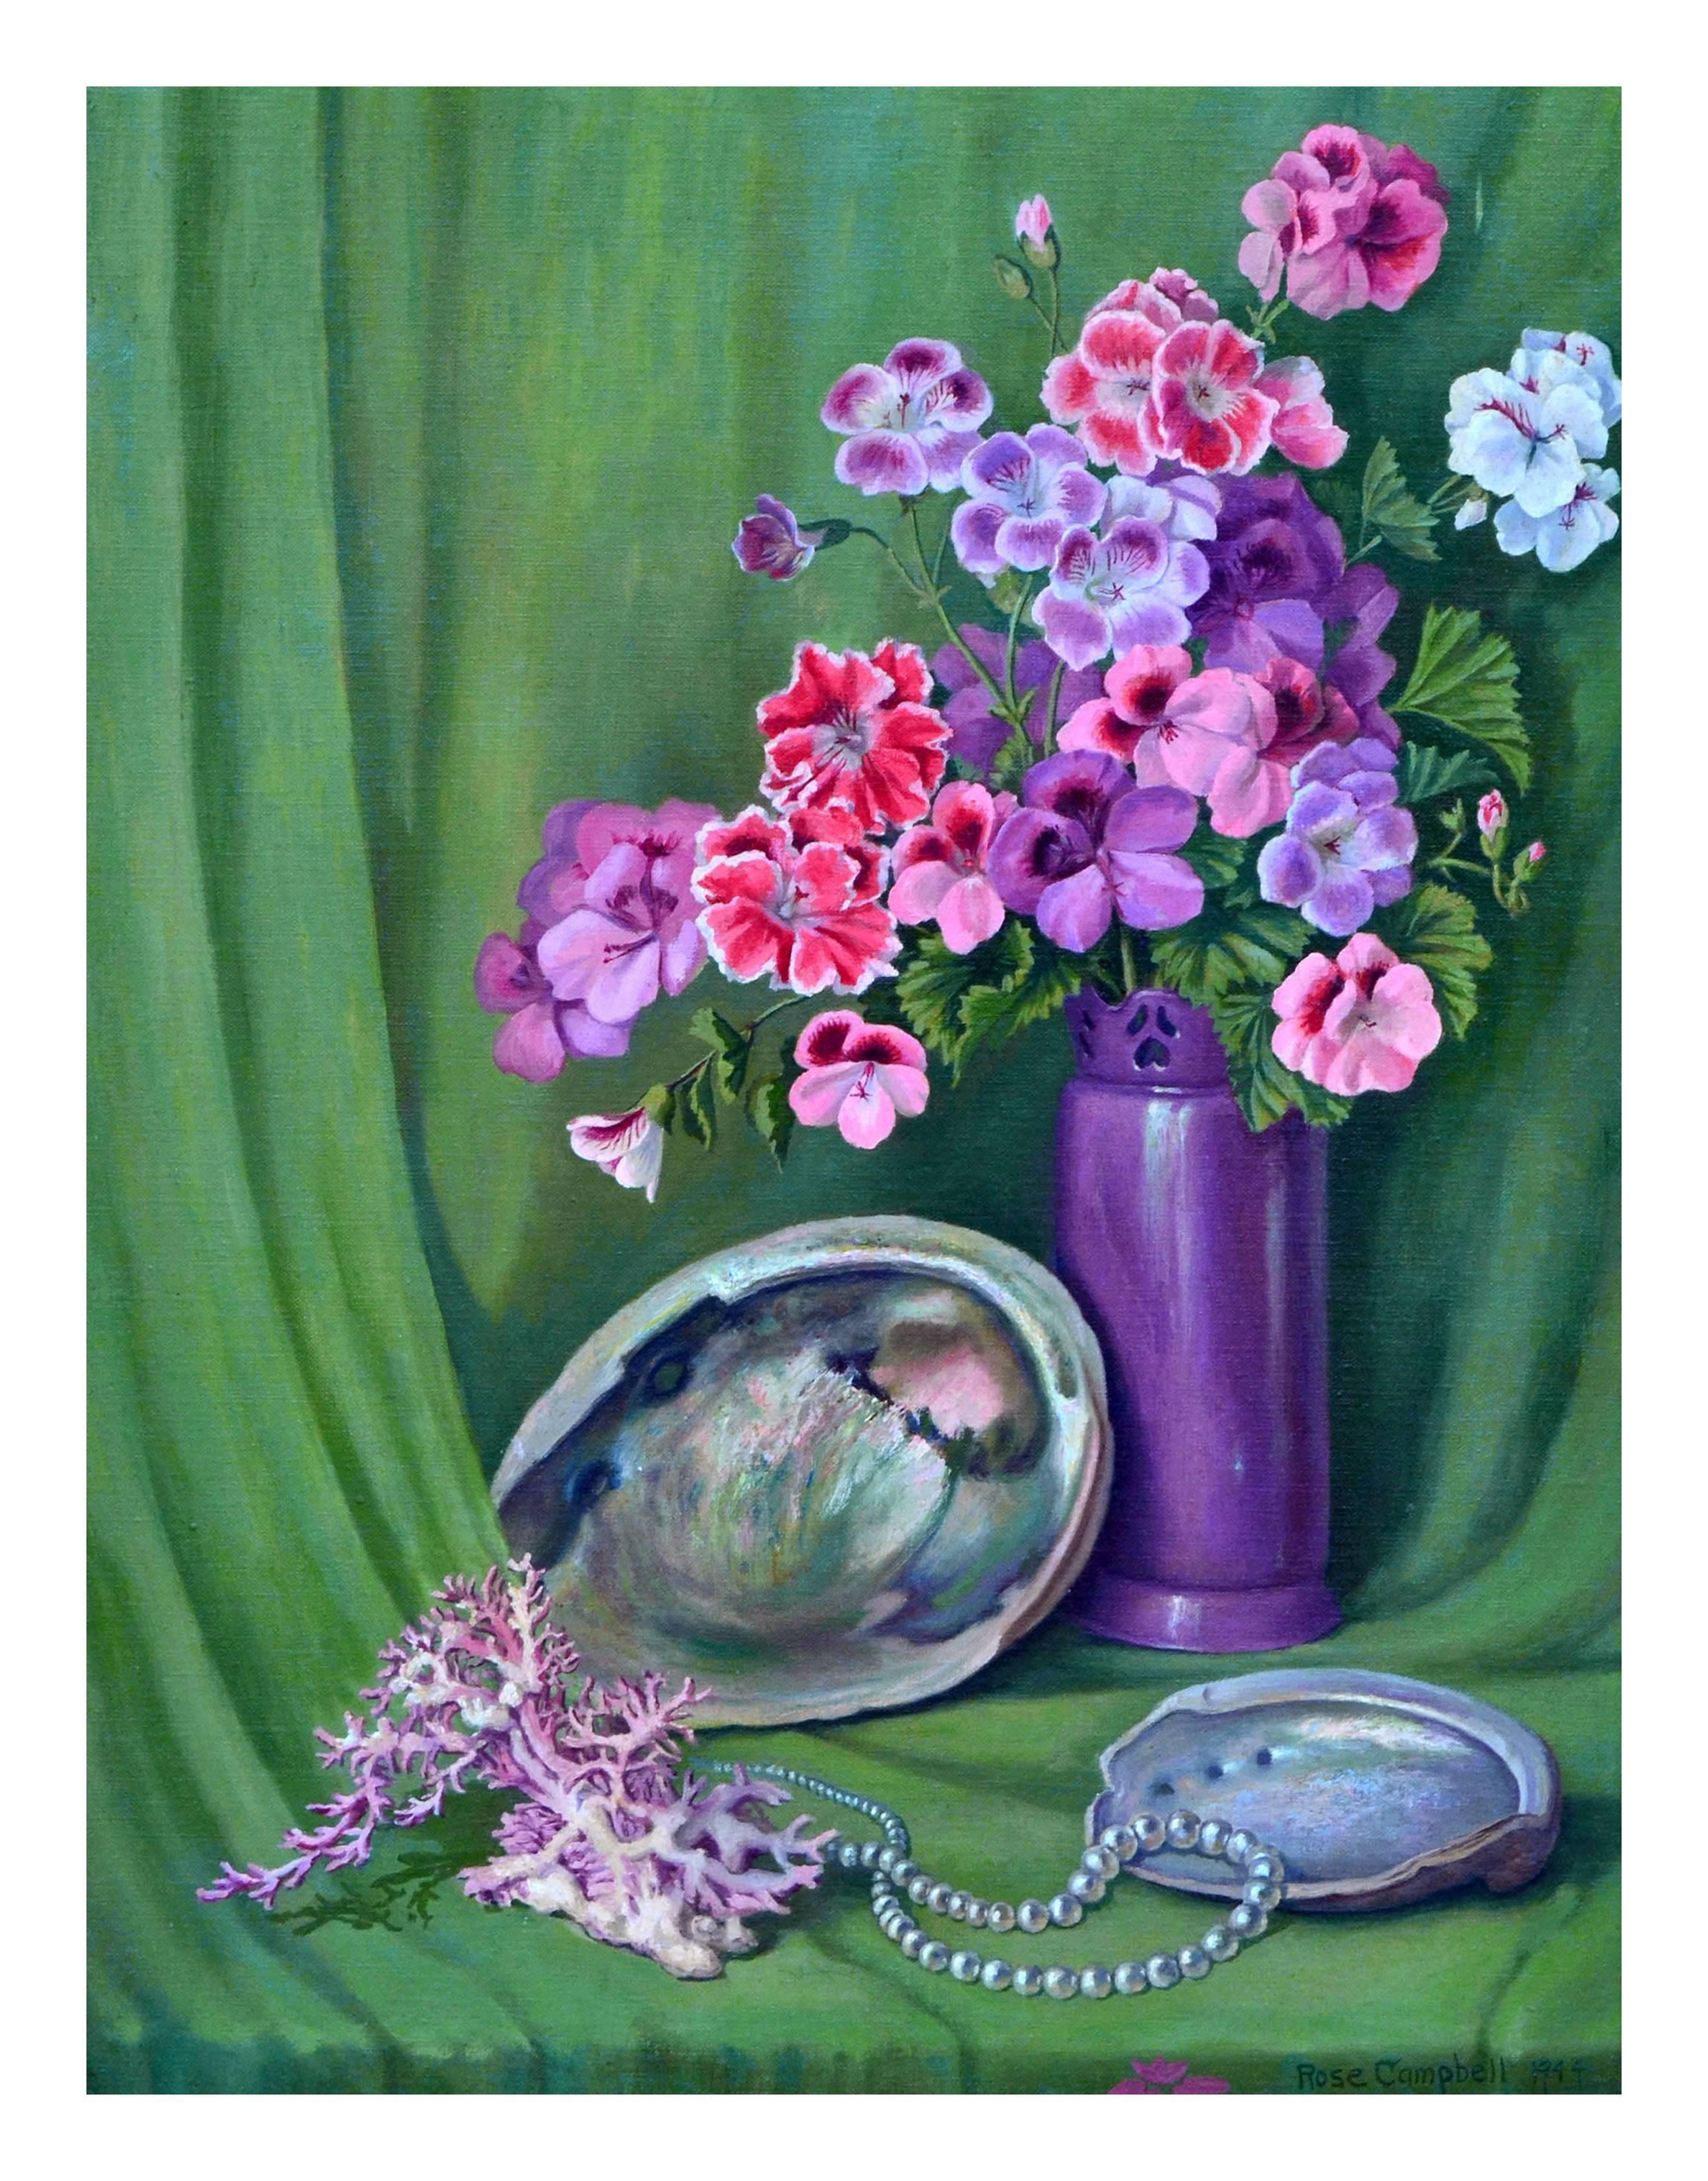 Geranium and Abalone Shell Still Life - Painting by Rose Campbell